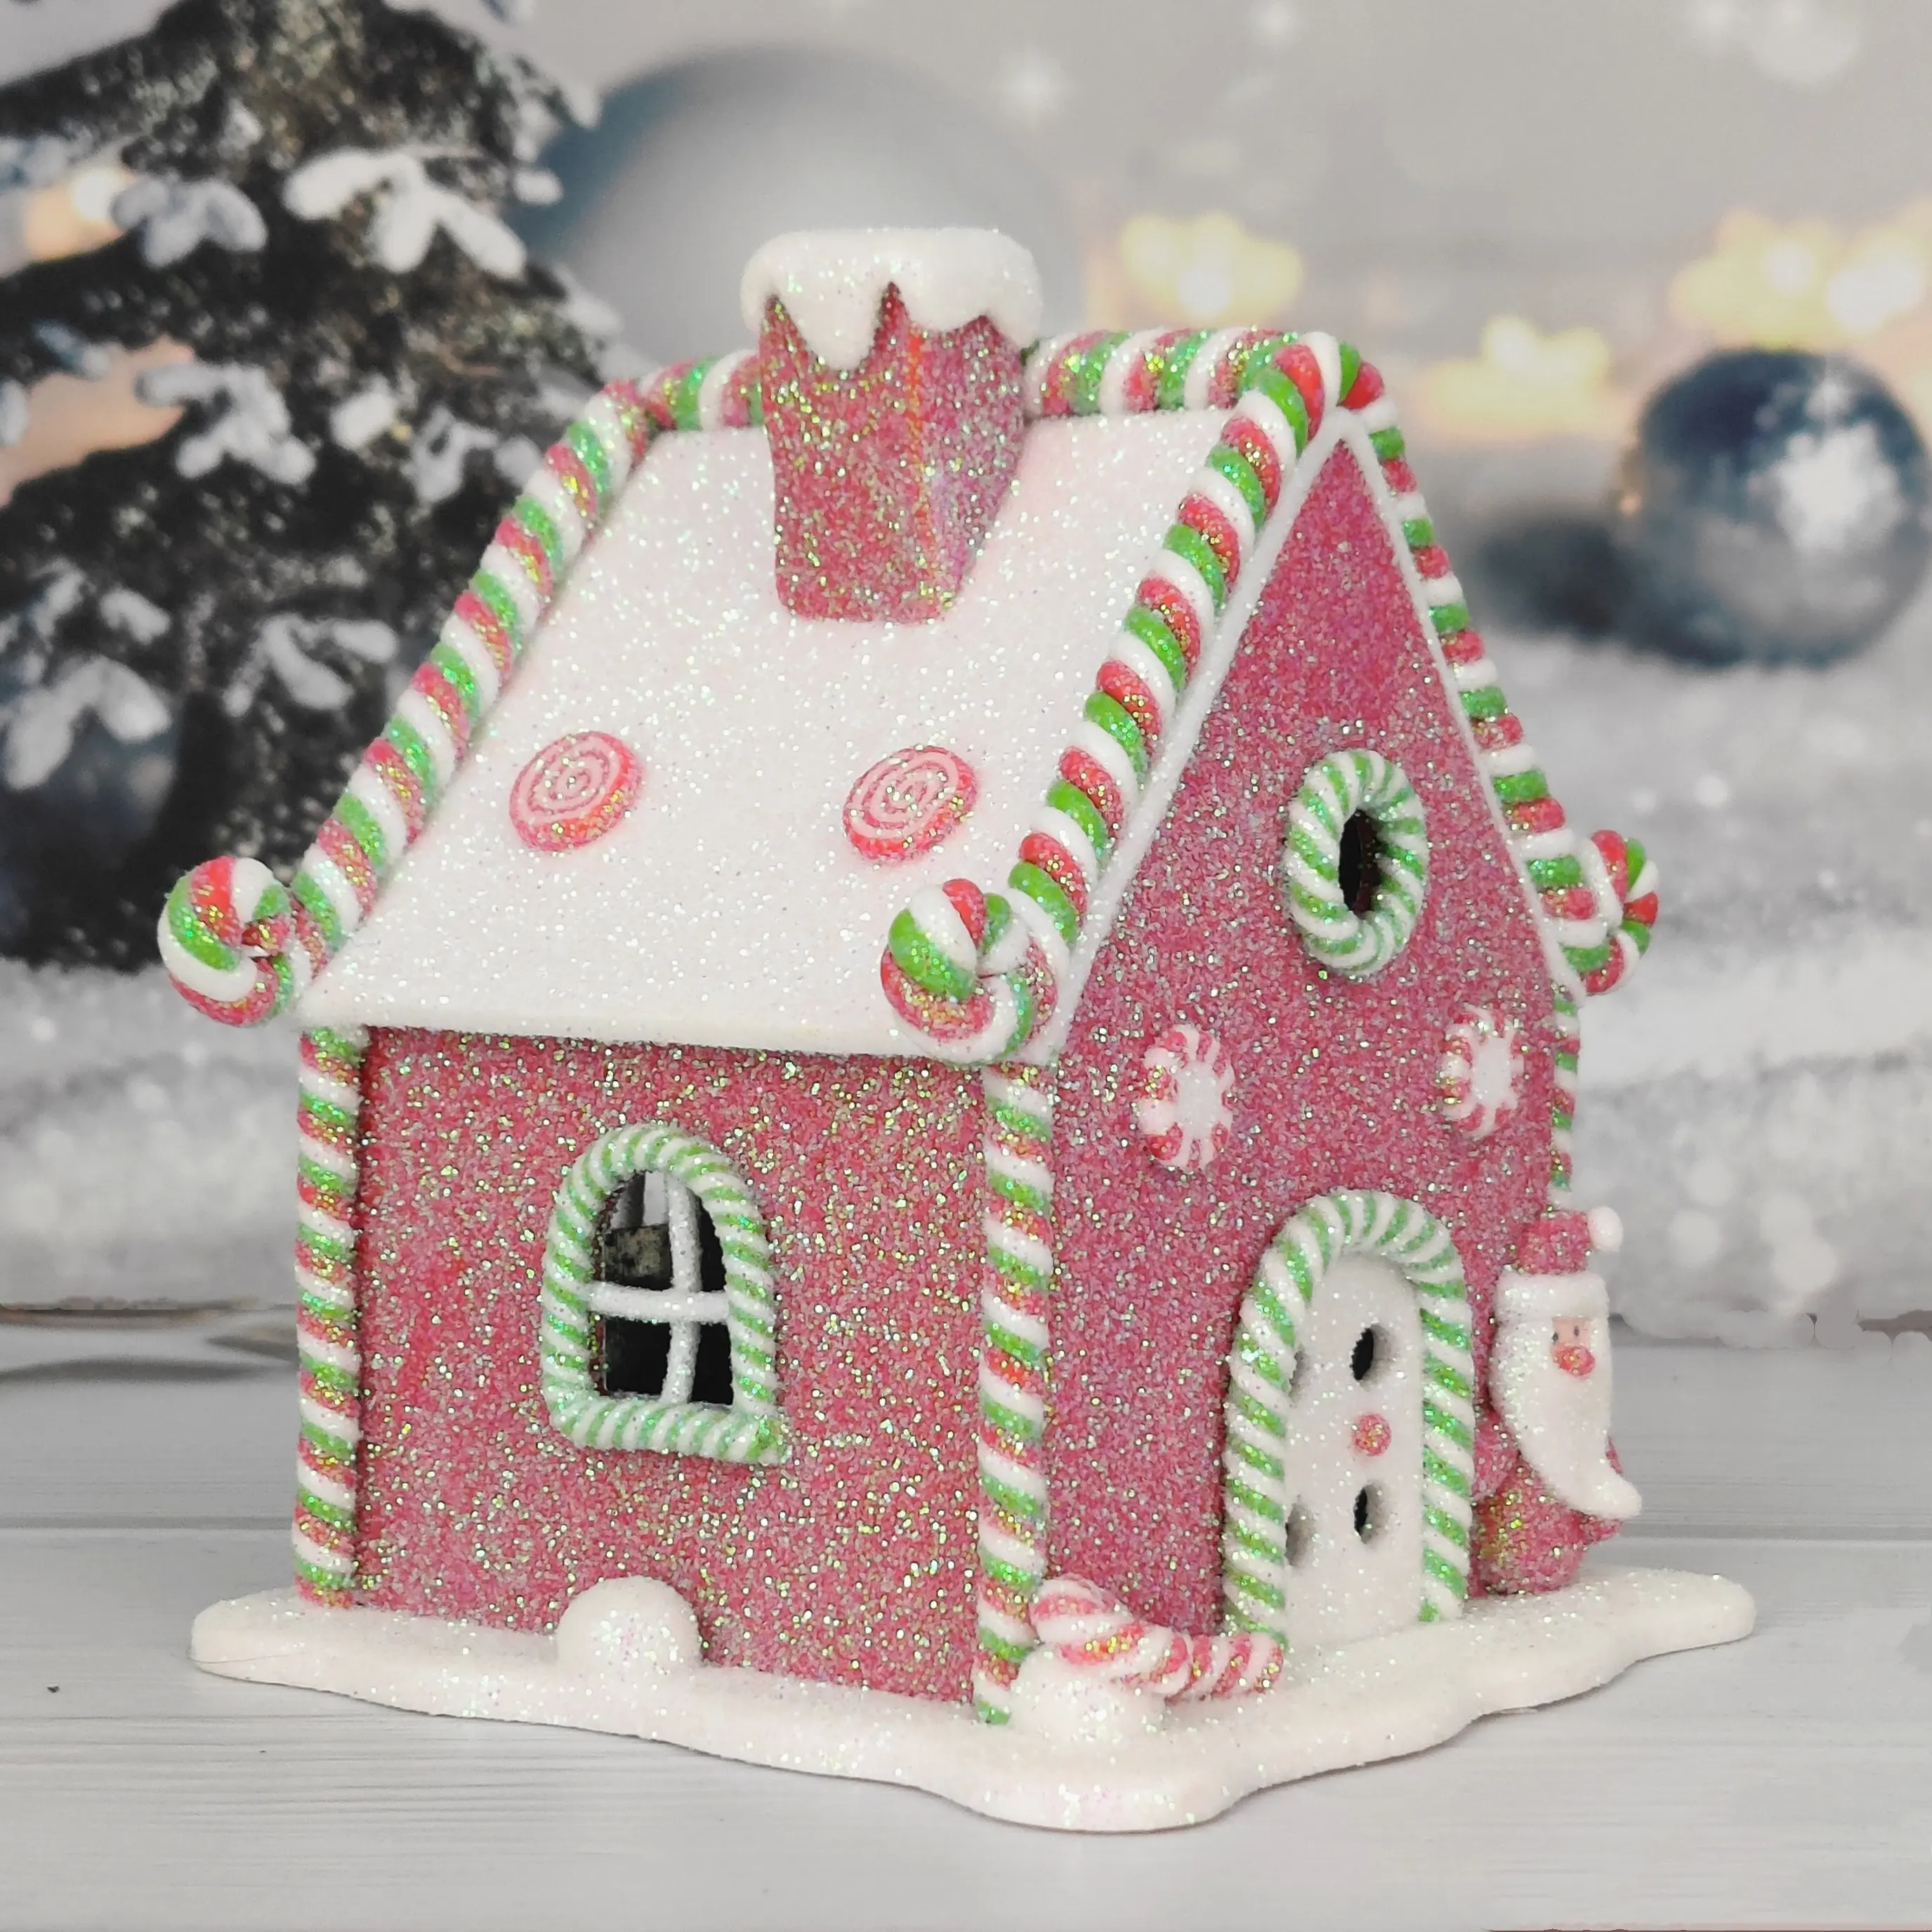 2022 Gingerbread House Ideas Led Lighted Candy Christmas Village House Figurines Polymer Clay Gingerbread House Craft Decoration